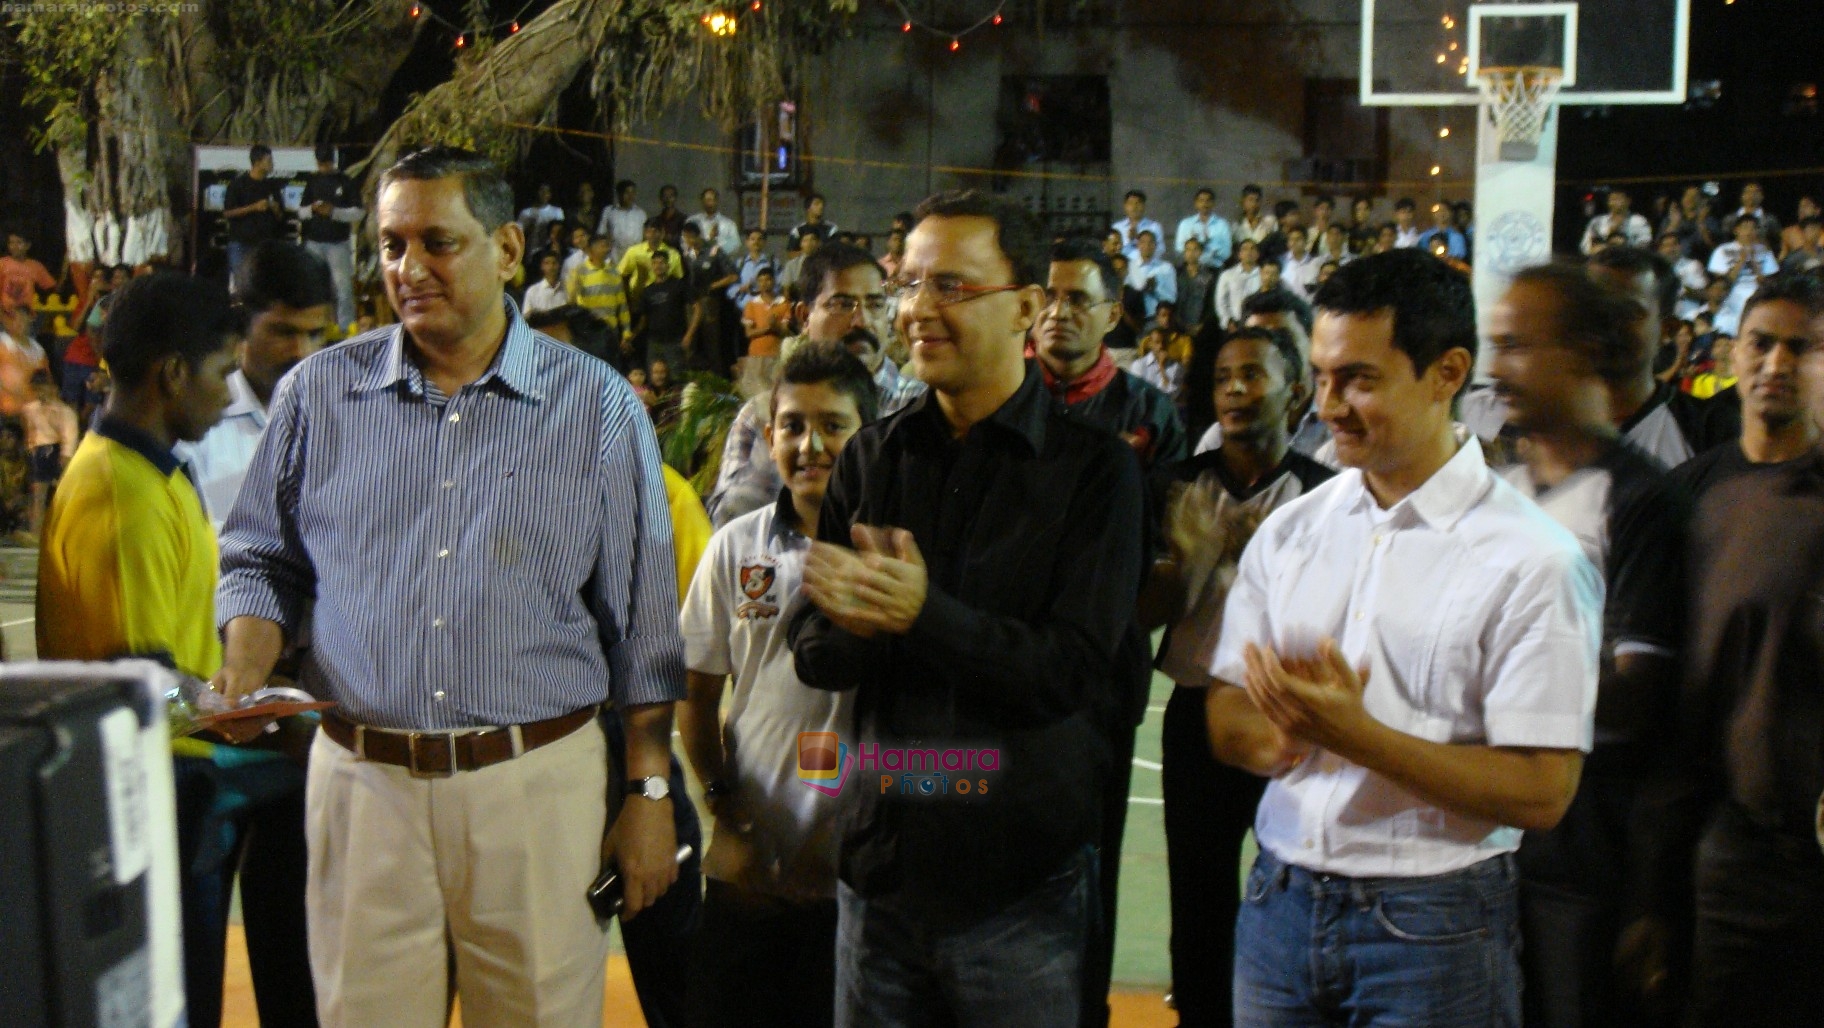 Vidhu Vinod Chopra and Aamir Khan salute the Heroes of 2611 at an event organized by the Mumbai Police in on 17th Feb 2009